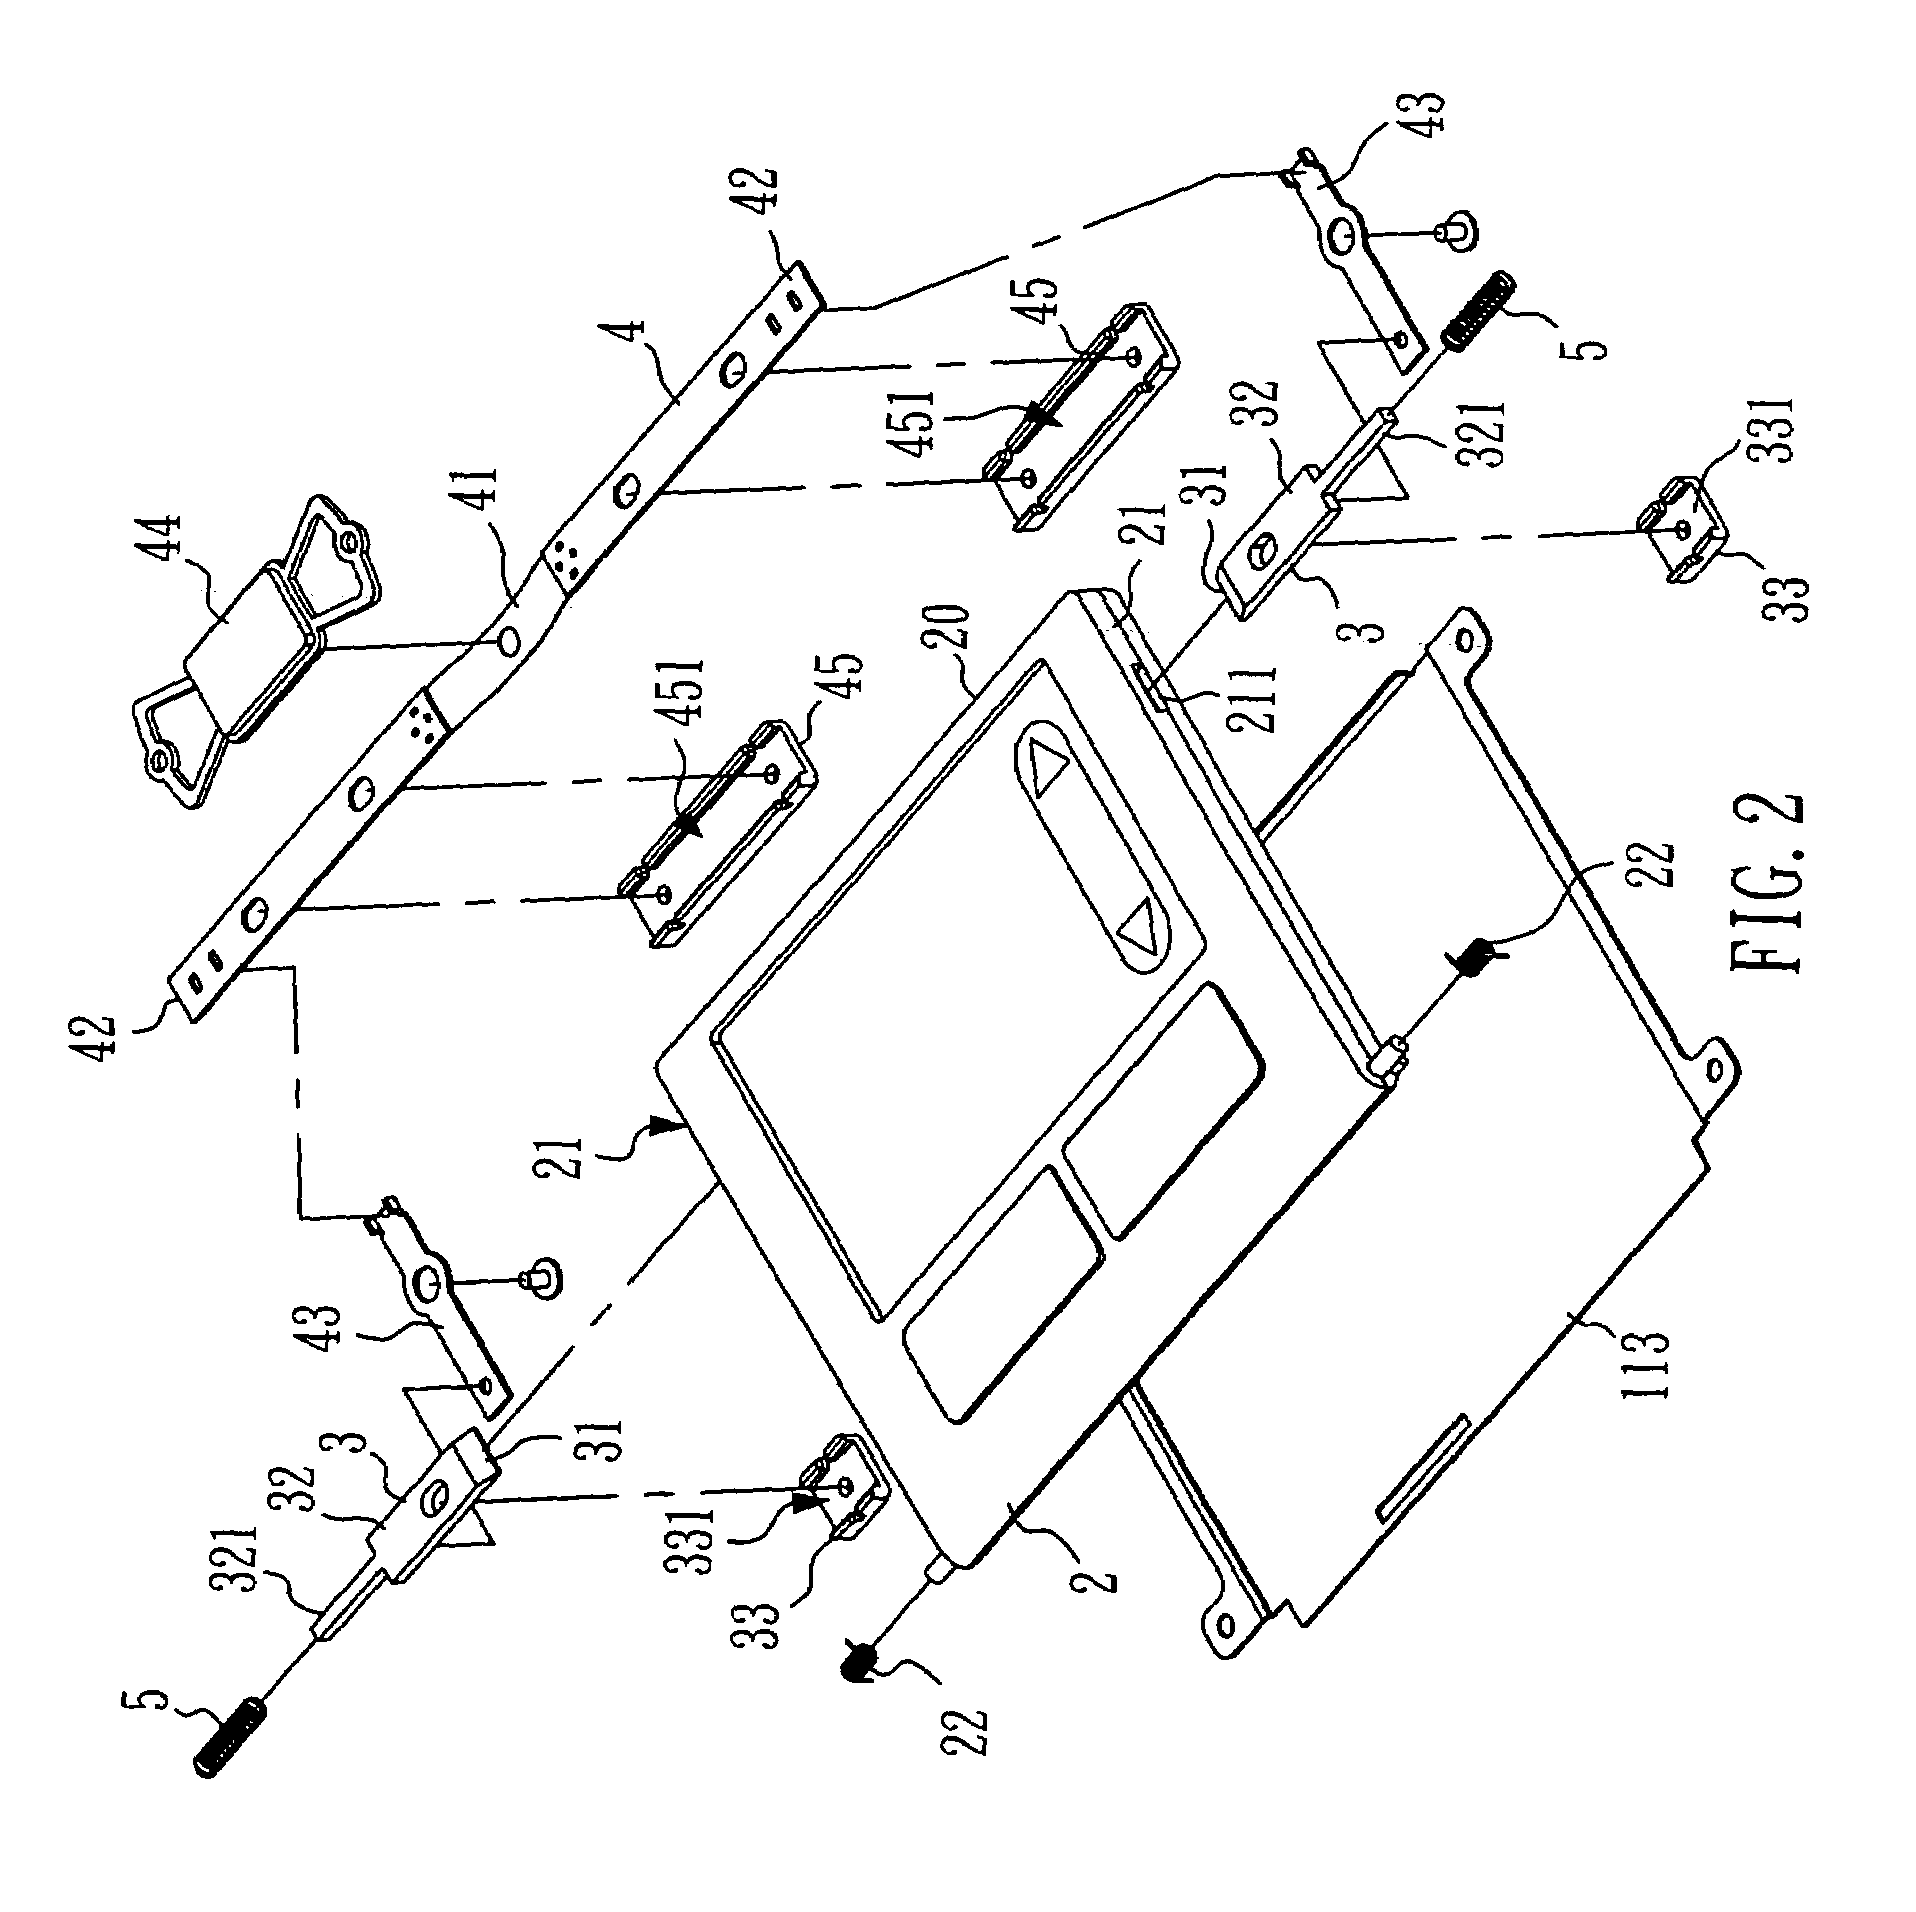 Swivel display inclining structure